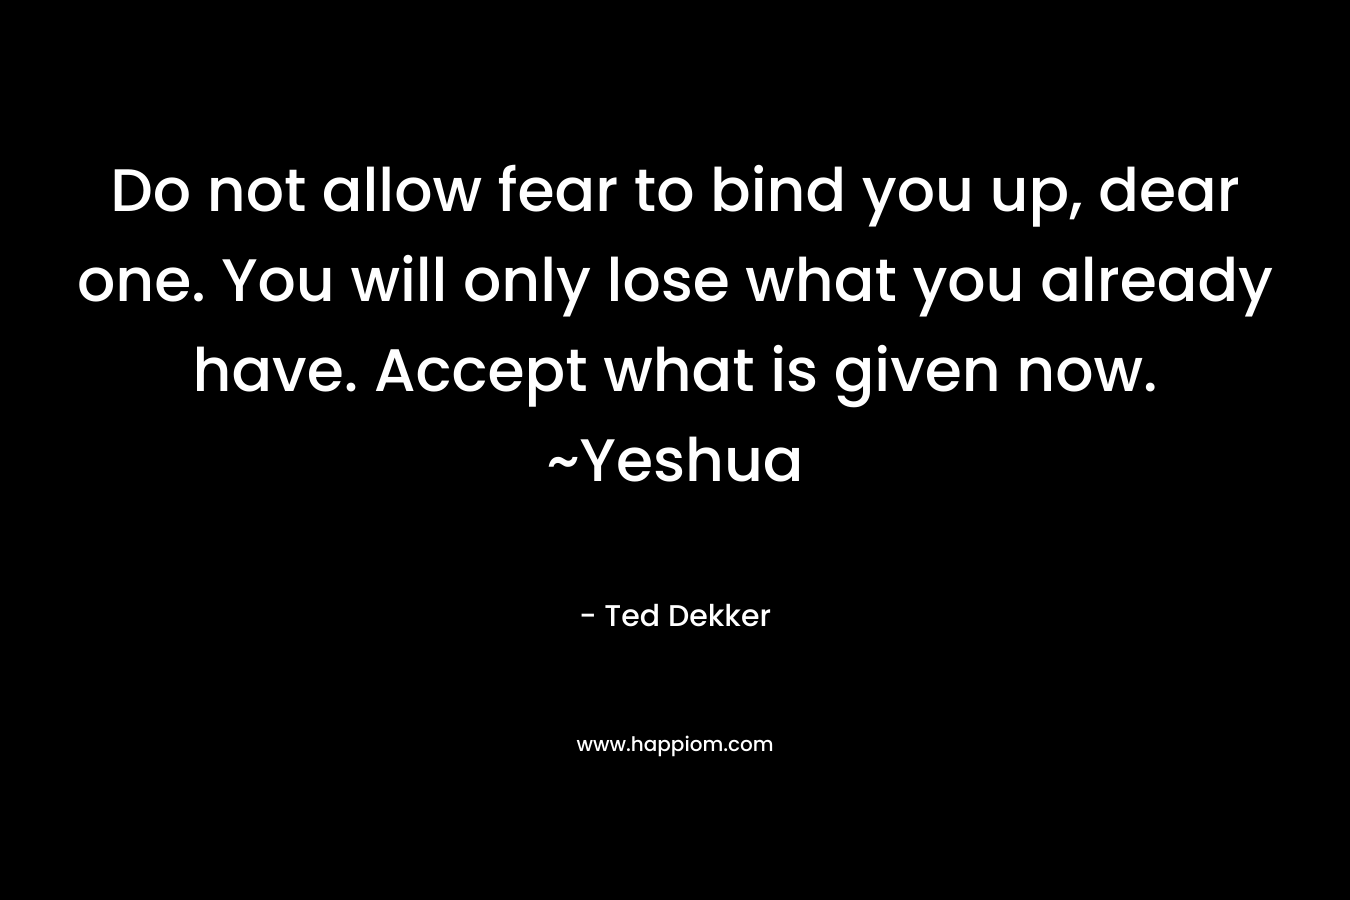 Do not allow fear to bind you up, dear one. You will only lose what you already have. Accept what is given now. ~Yeshua